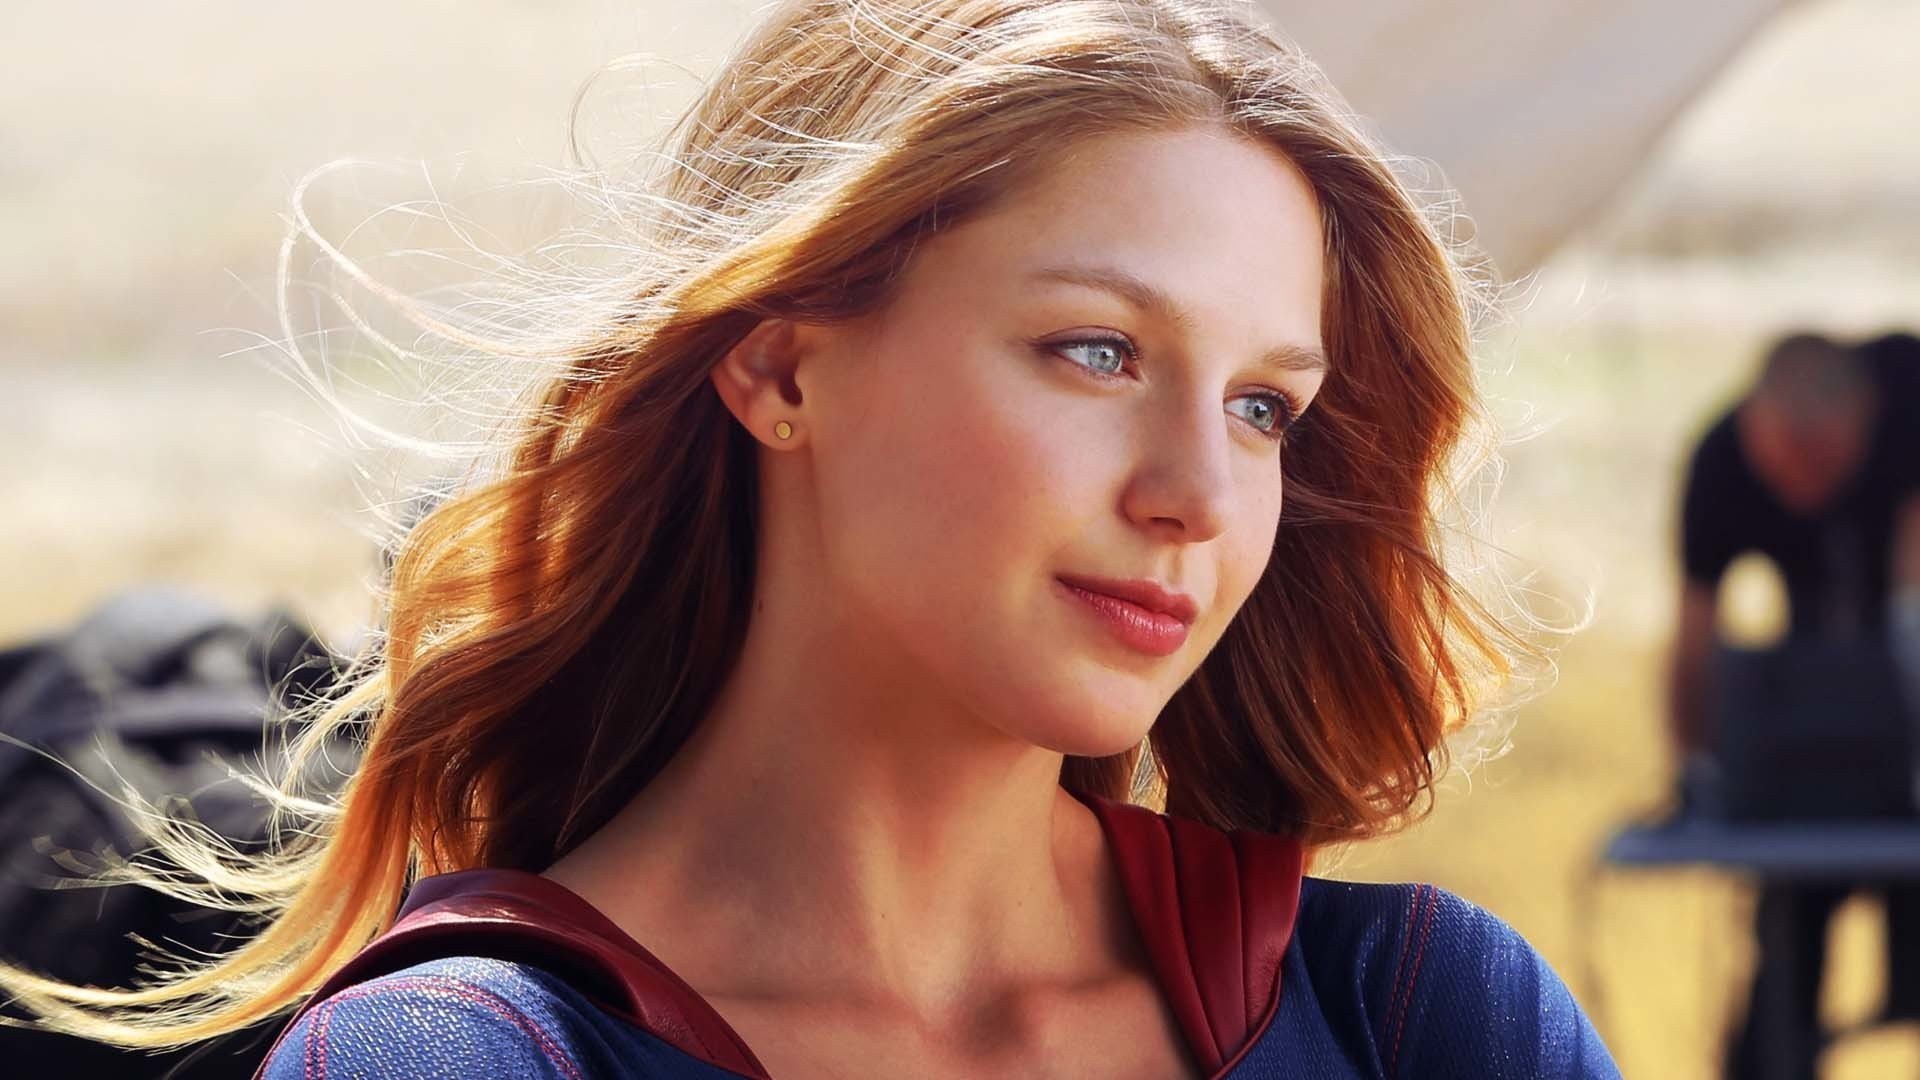 Supergirl Wallpaper HD with high-resolution 1920x1080 pixel. You can use this wallpaper for your Desktop Computer Backgrounds, Mac Wallpapers, Android Lock screen or iPhone Screensavers and another smartphone device